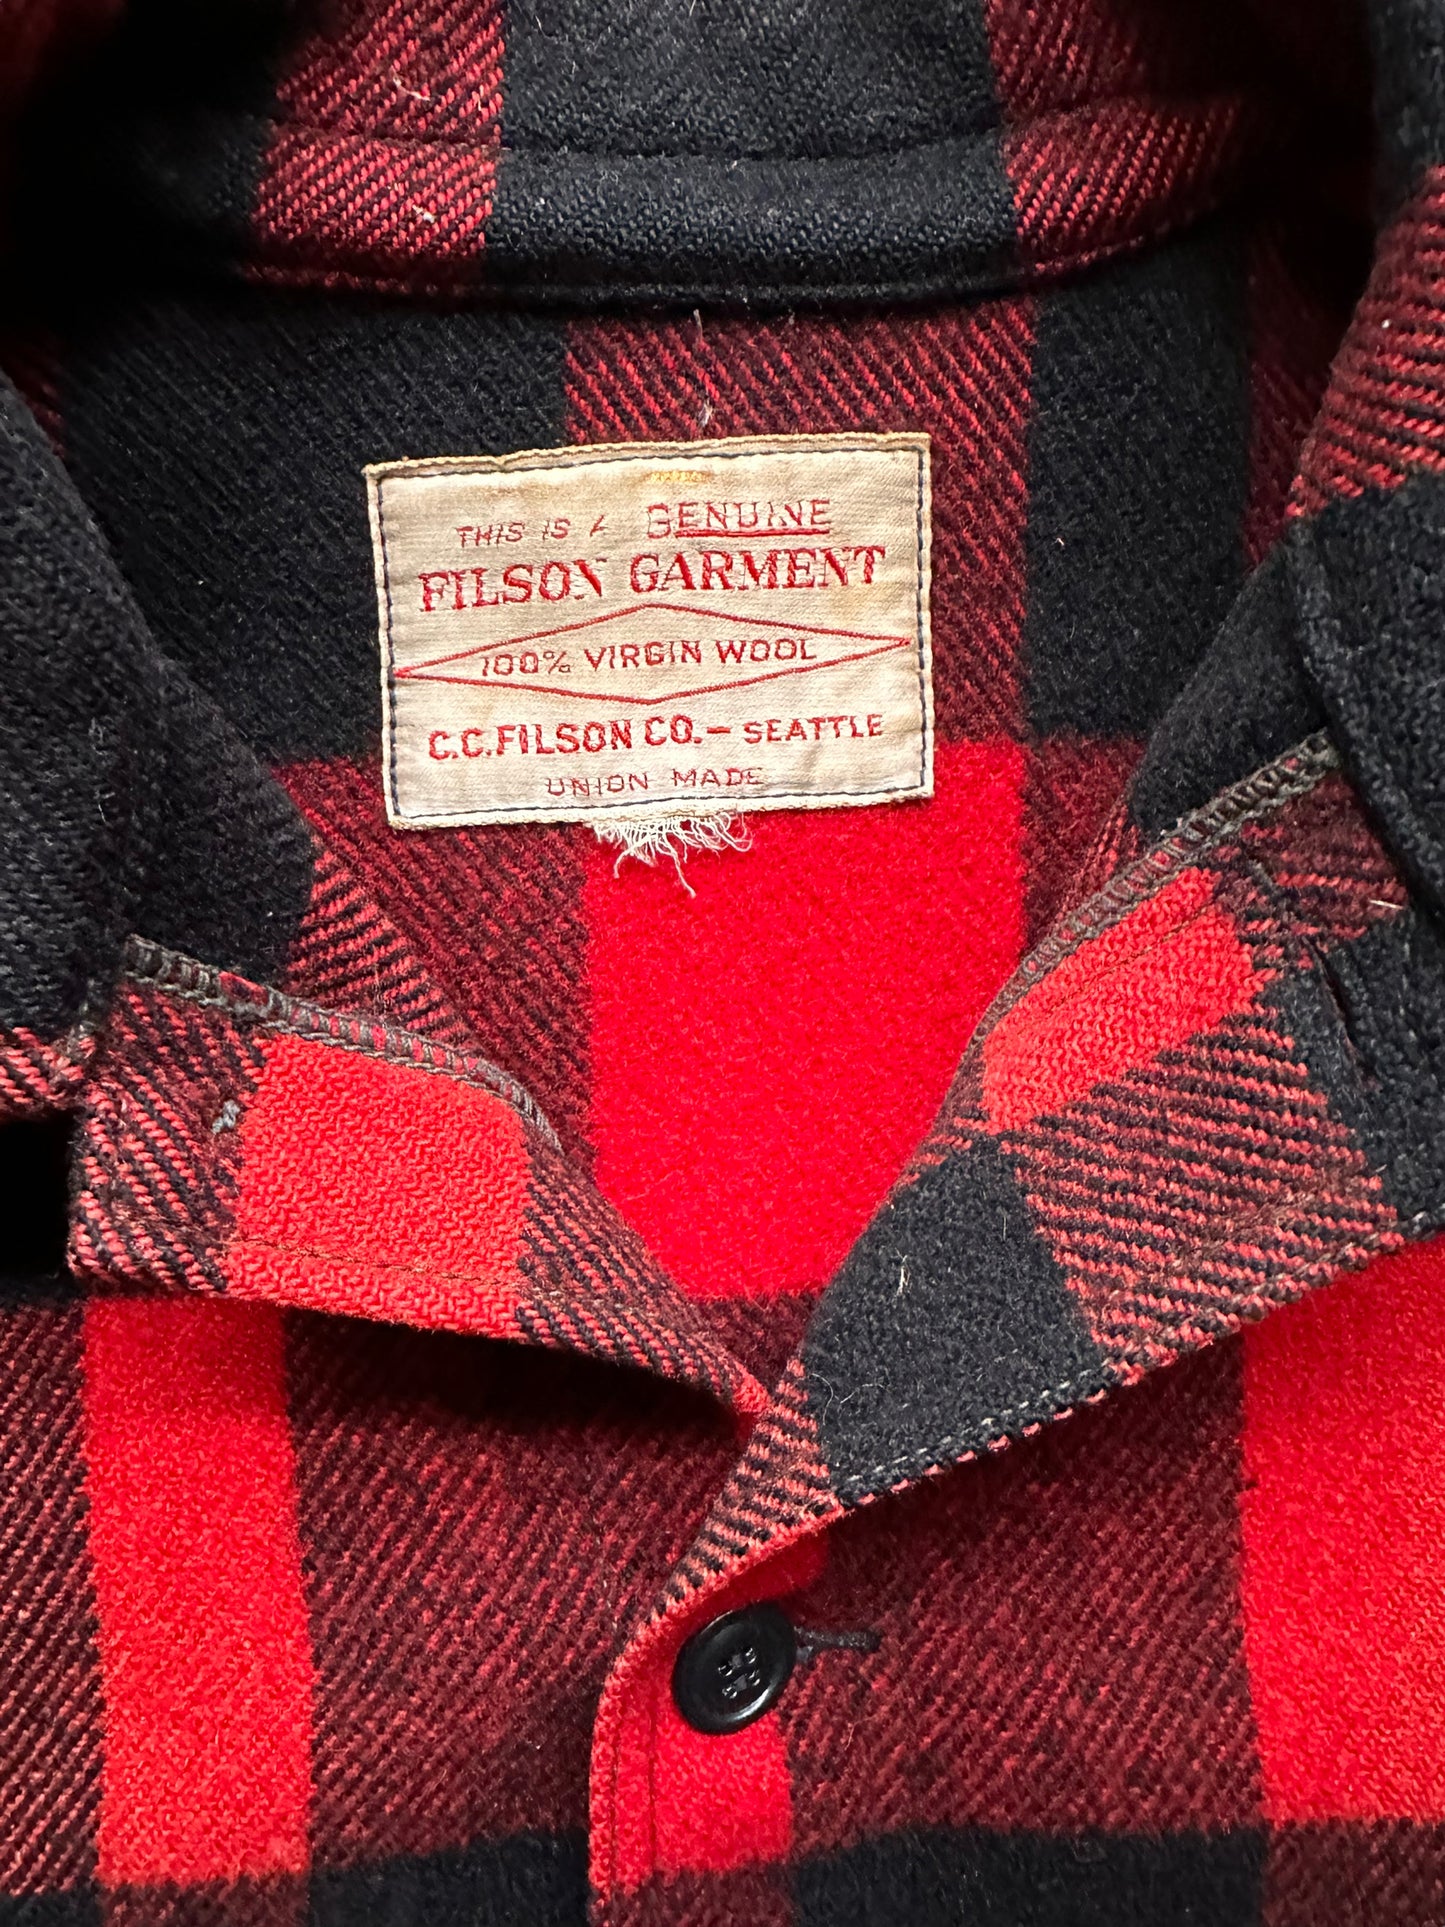 Tag View of Vintage Sun Faded Union Made Filson  Red and Black Mackinaw Cruiser SZ 44 |  Vintage Filson Mackinaw | Vintage Filson Workwear Seattle